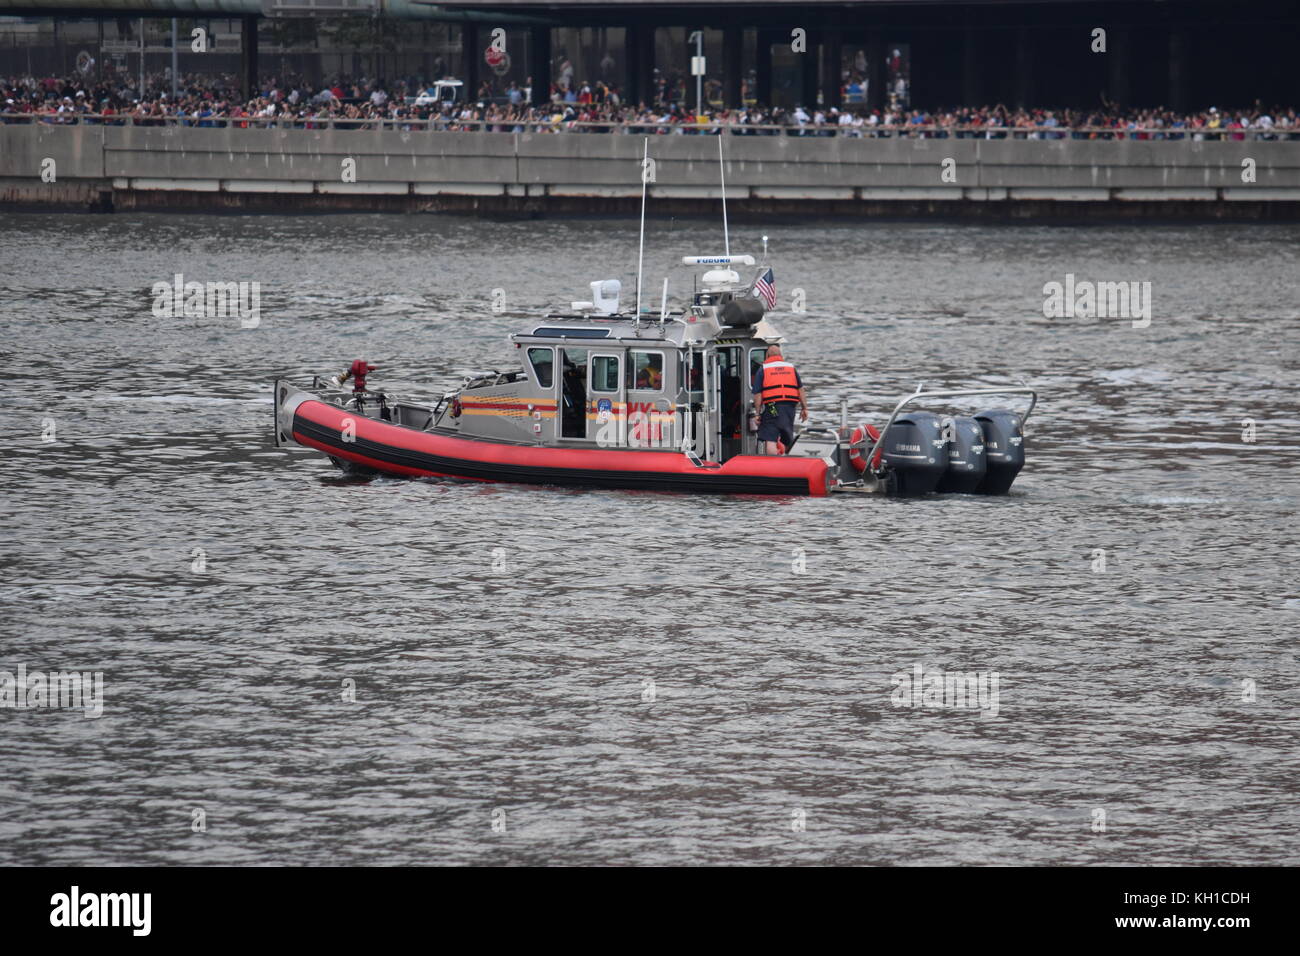 FDNY boat on patrol during the 4th of July celebrations on the East River, with spectators lining FDR drive, taken from Roosevelt Island Stock Photo